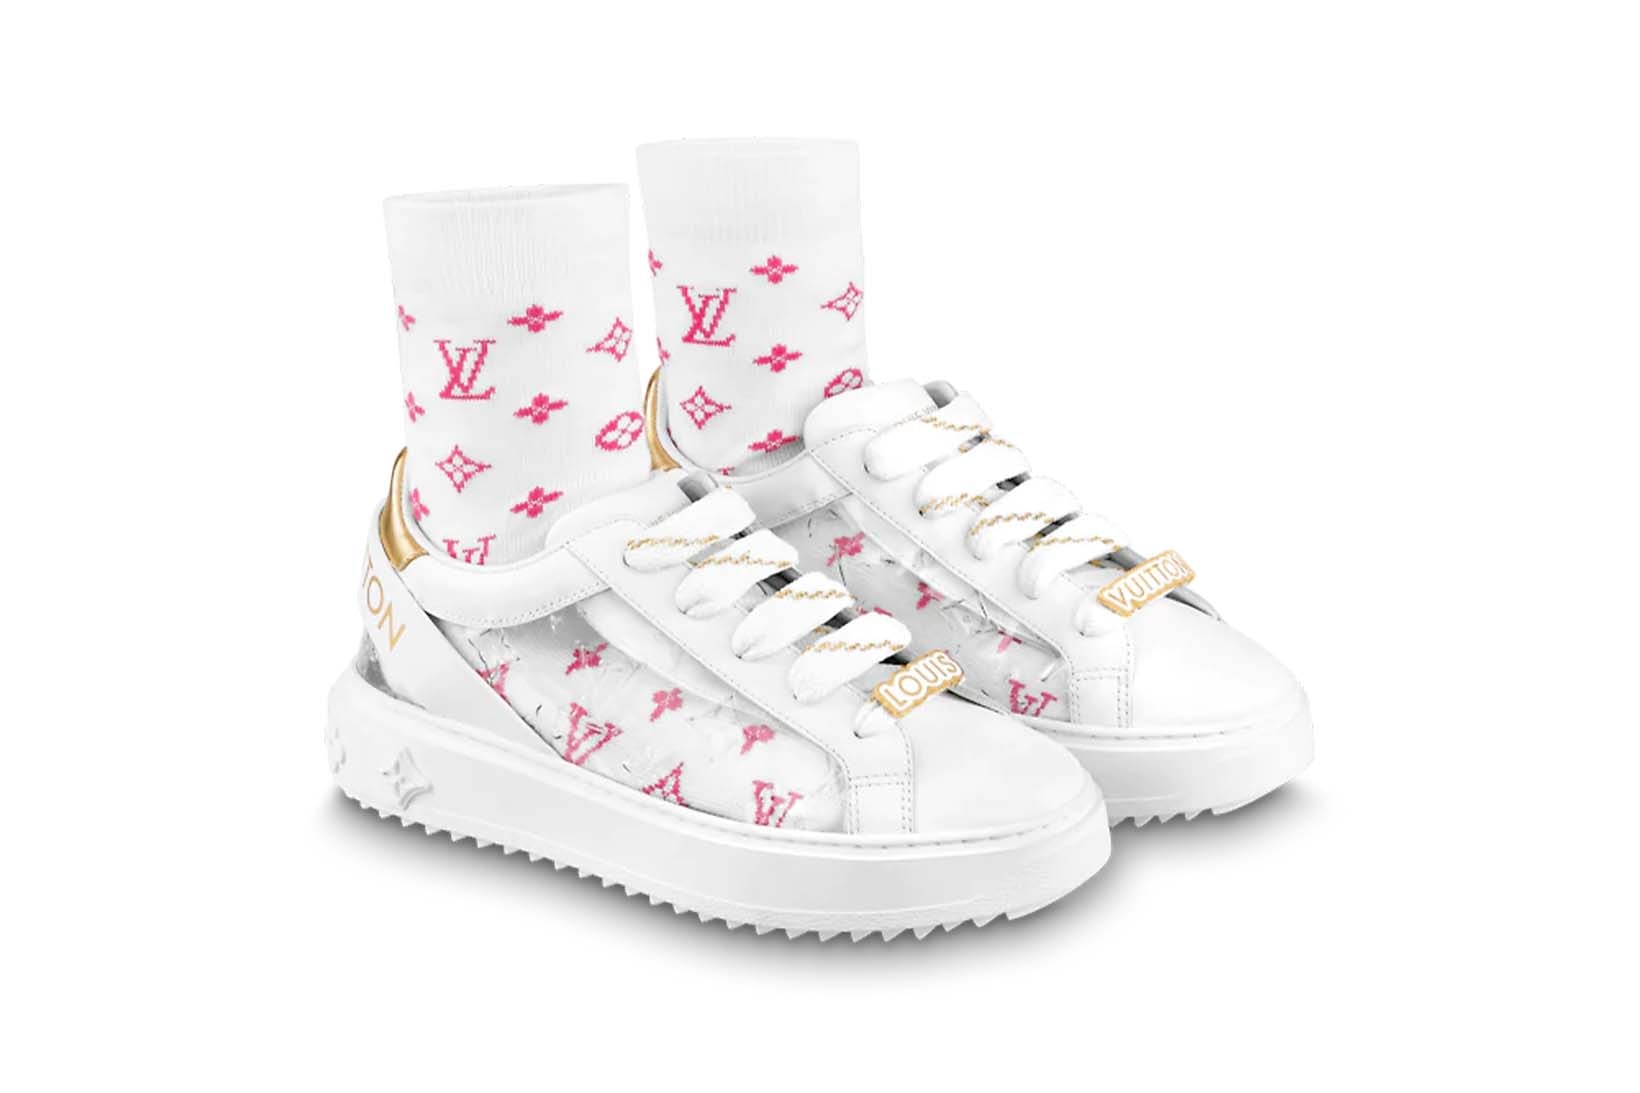 Louis Vuitton Sneaker Time Out Transparent White Pink Gold Socks Price